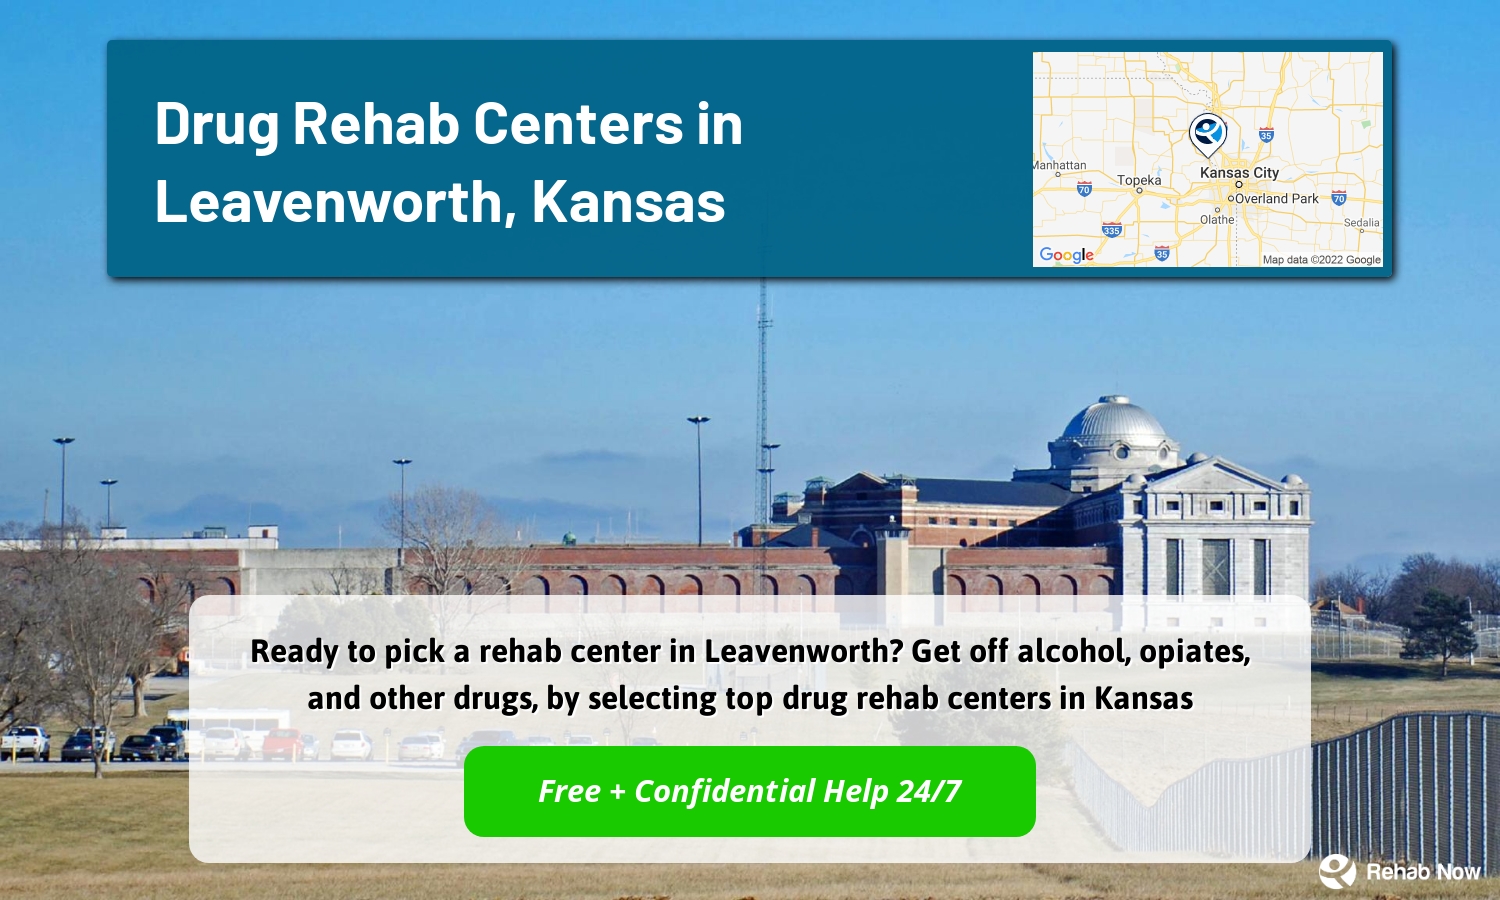 Ready to pick a rehab center in Leavenworth? Get off alcohol, opiates, and other drugs, by selecting top drug rehab centers in Kansas